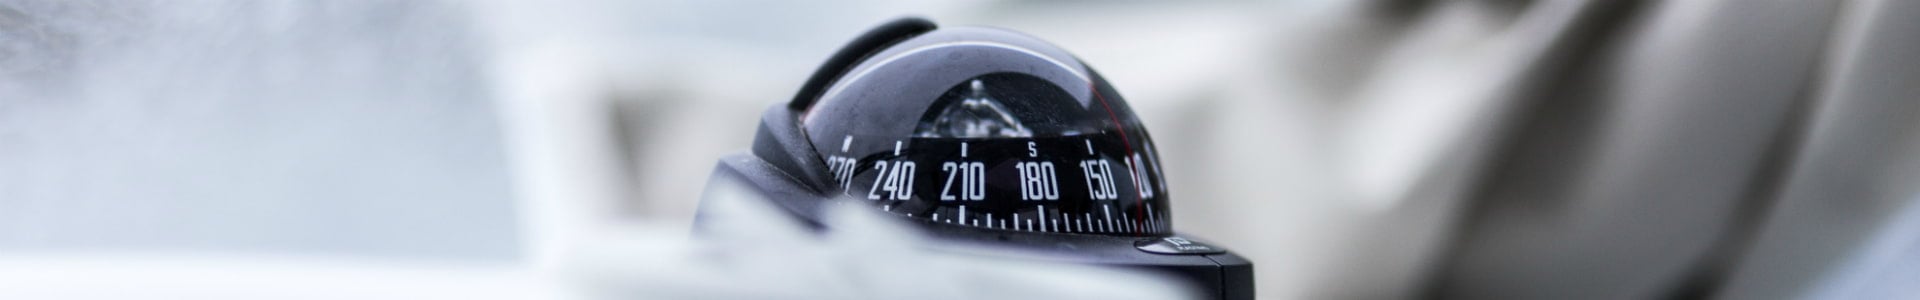 Image of a compass in a wheelhouse